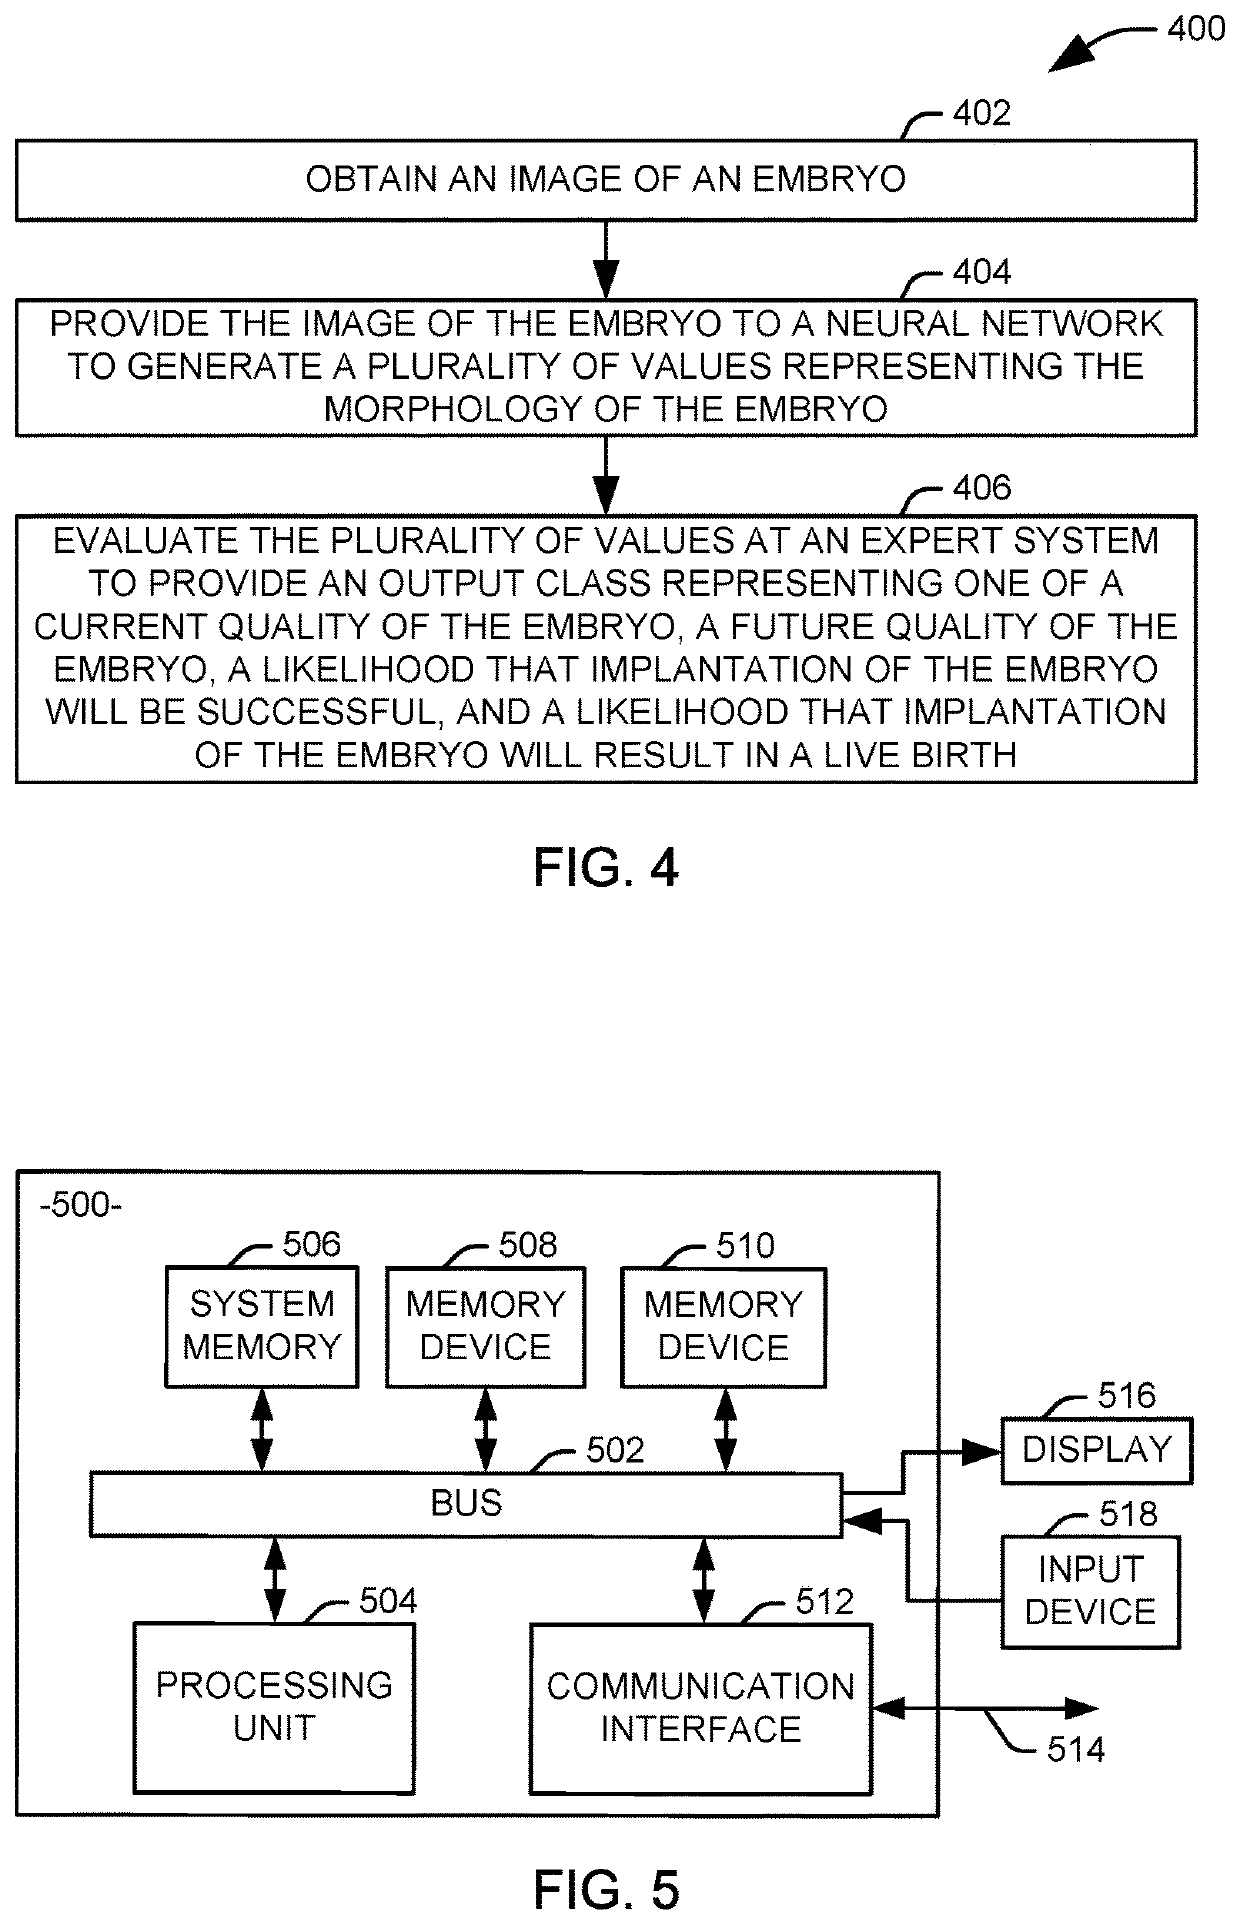 Automated evaluation of human embryos